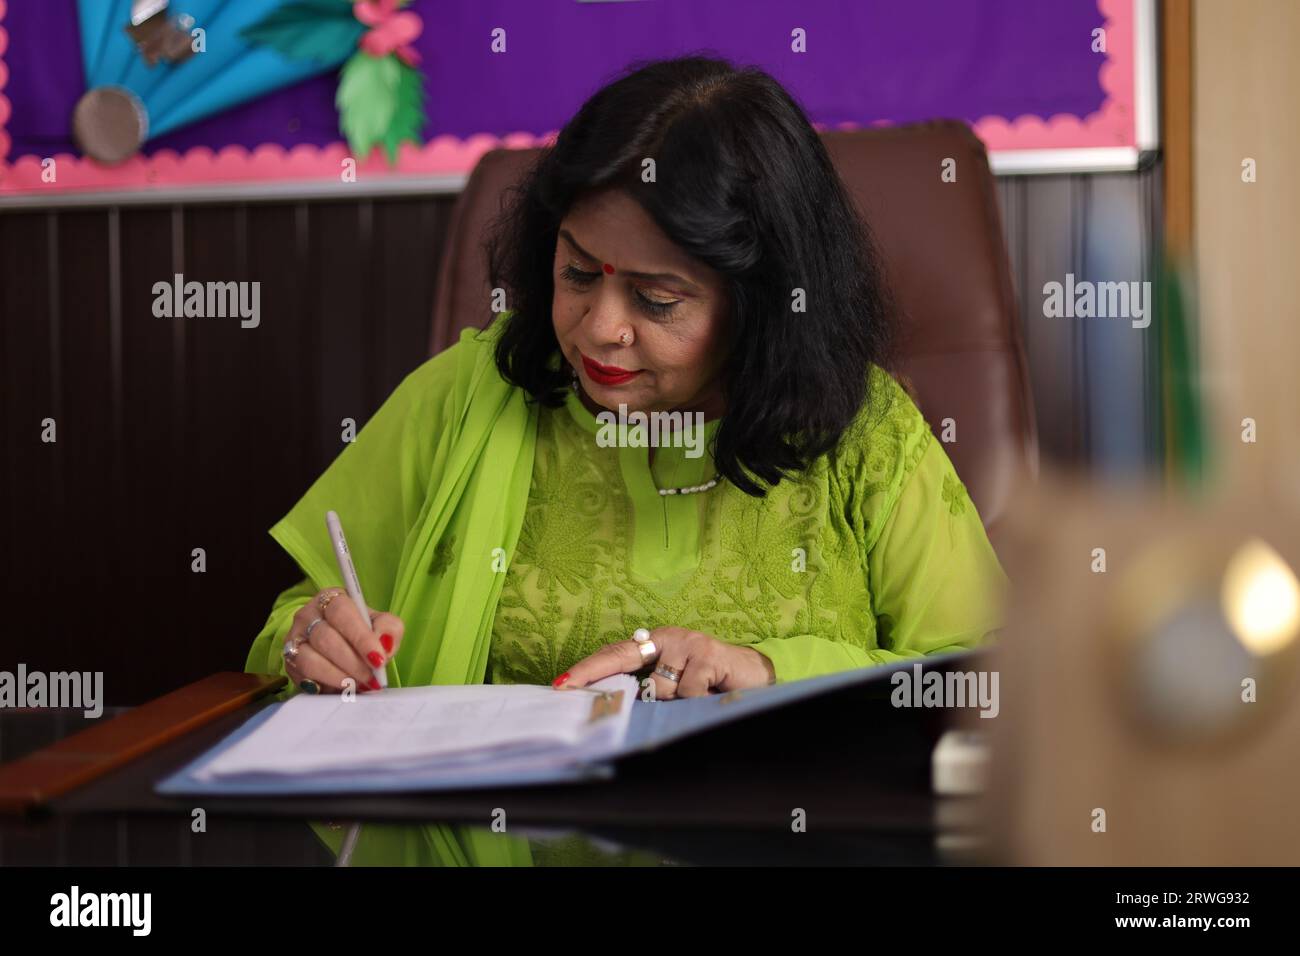 Principal mam signing a contract, agreement for the progress of the students in her school, educational progress. Stock Photo